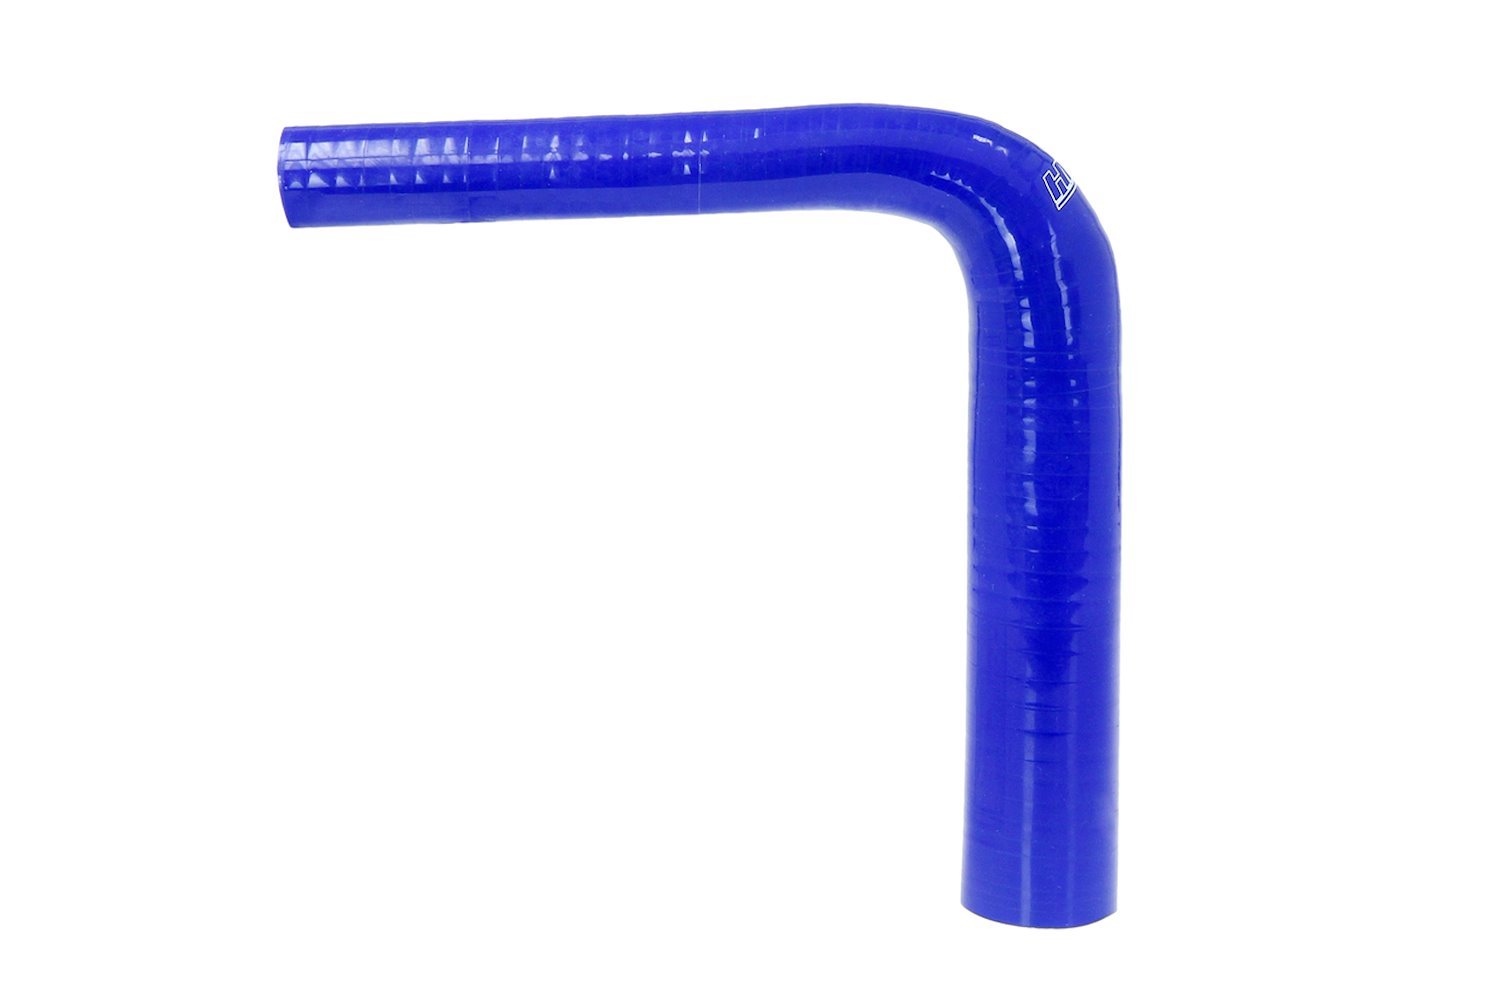 HTSER90-125-175-BLUE Silicone 90-Degree Elbow Hose, High-Temp 4-Ply Reinforced, 1-1/4 in. - 1-3/4 in. ID, Blue